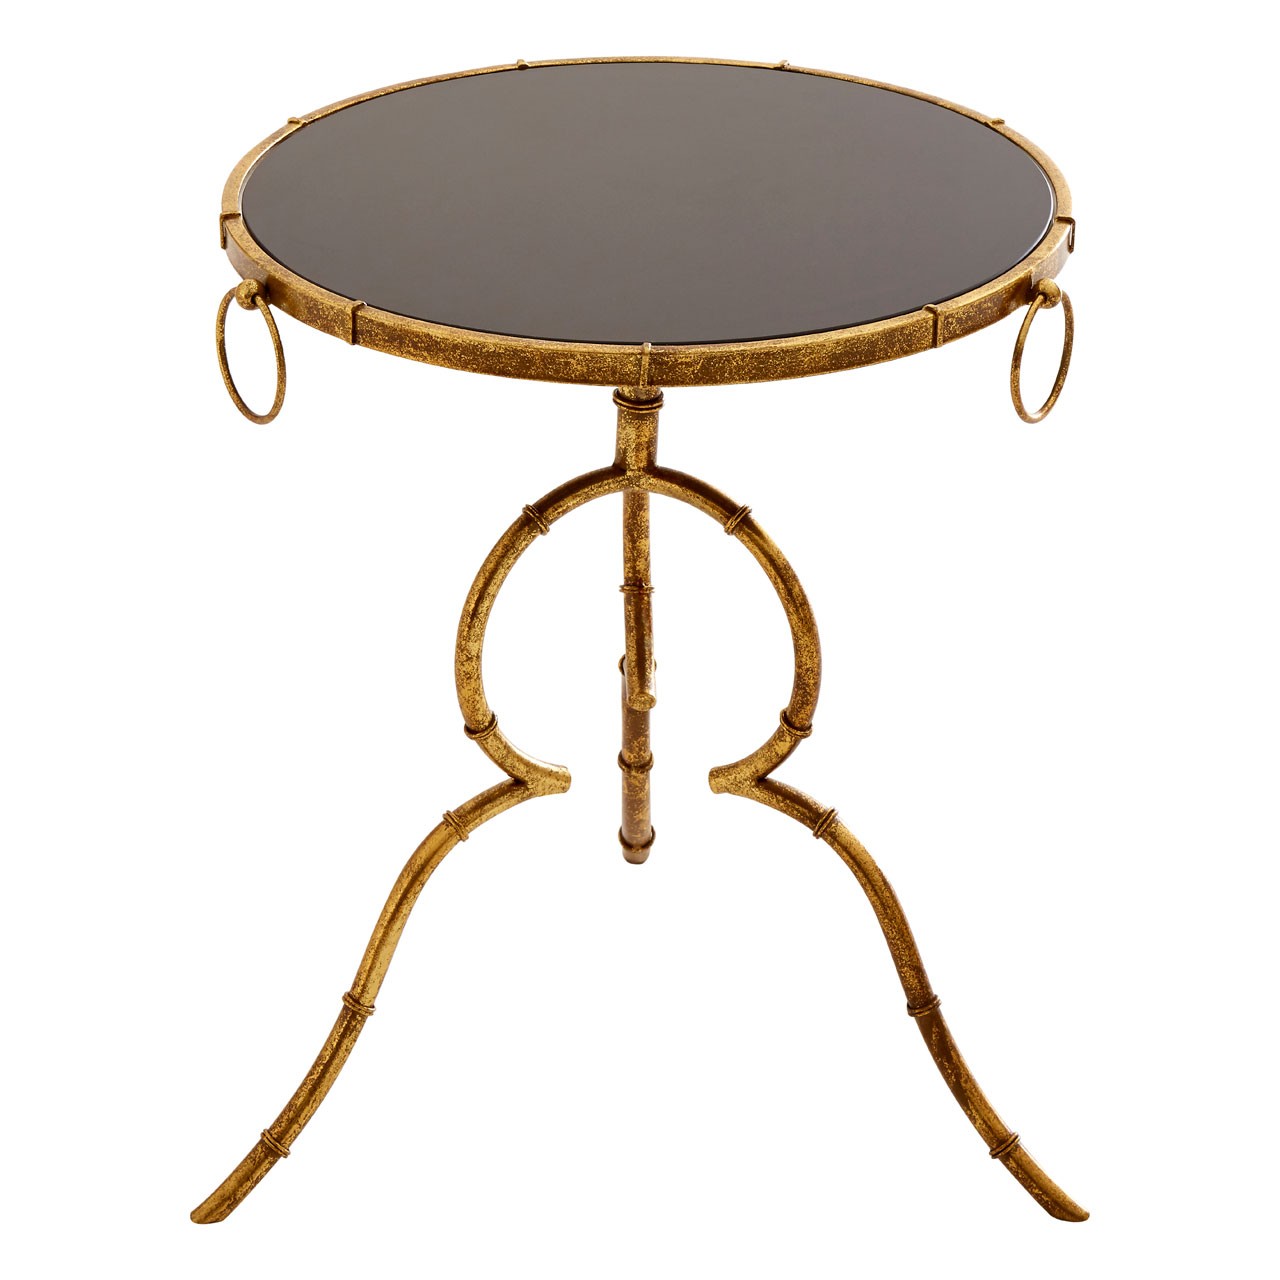 Monroe Black Tempered Glass Top Accent Table